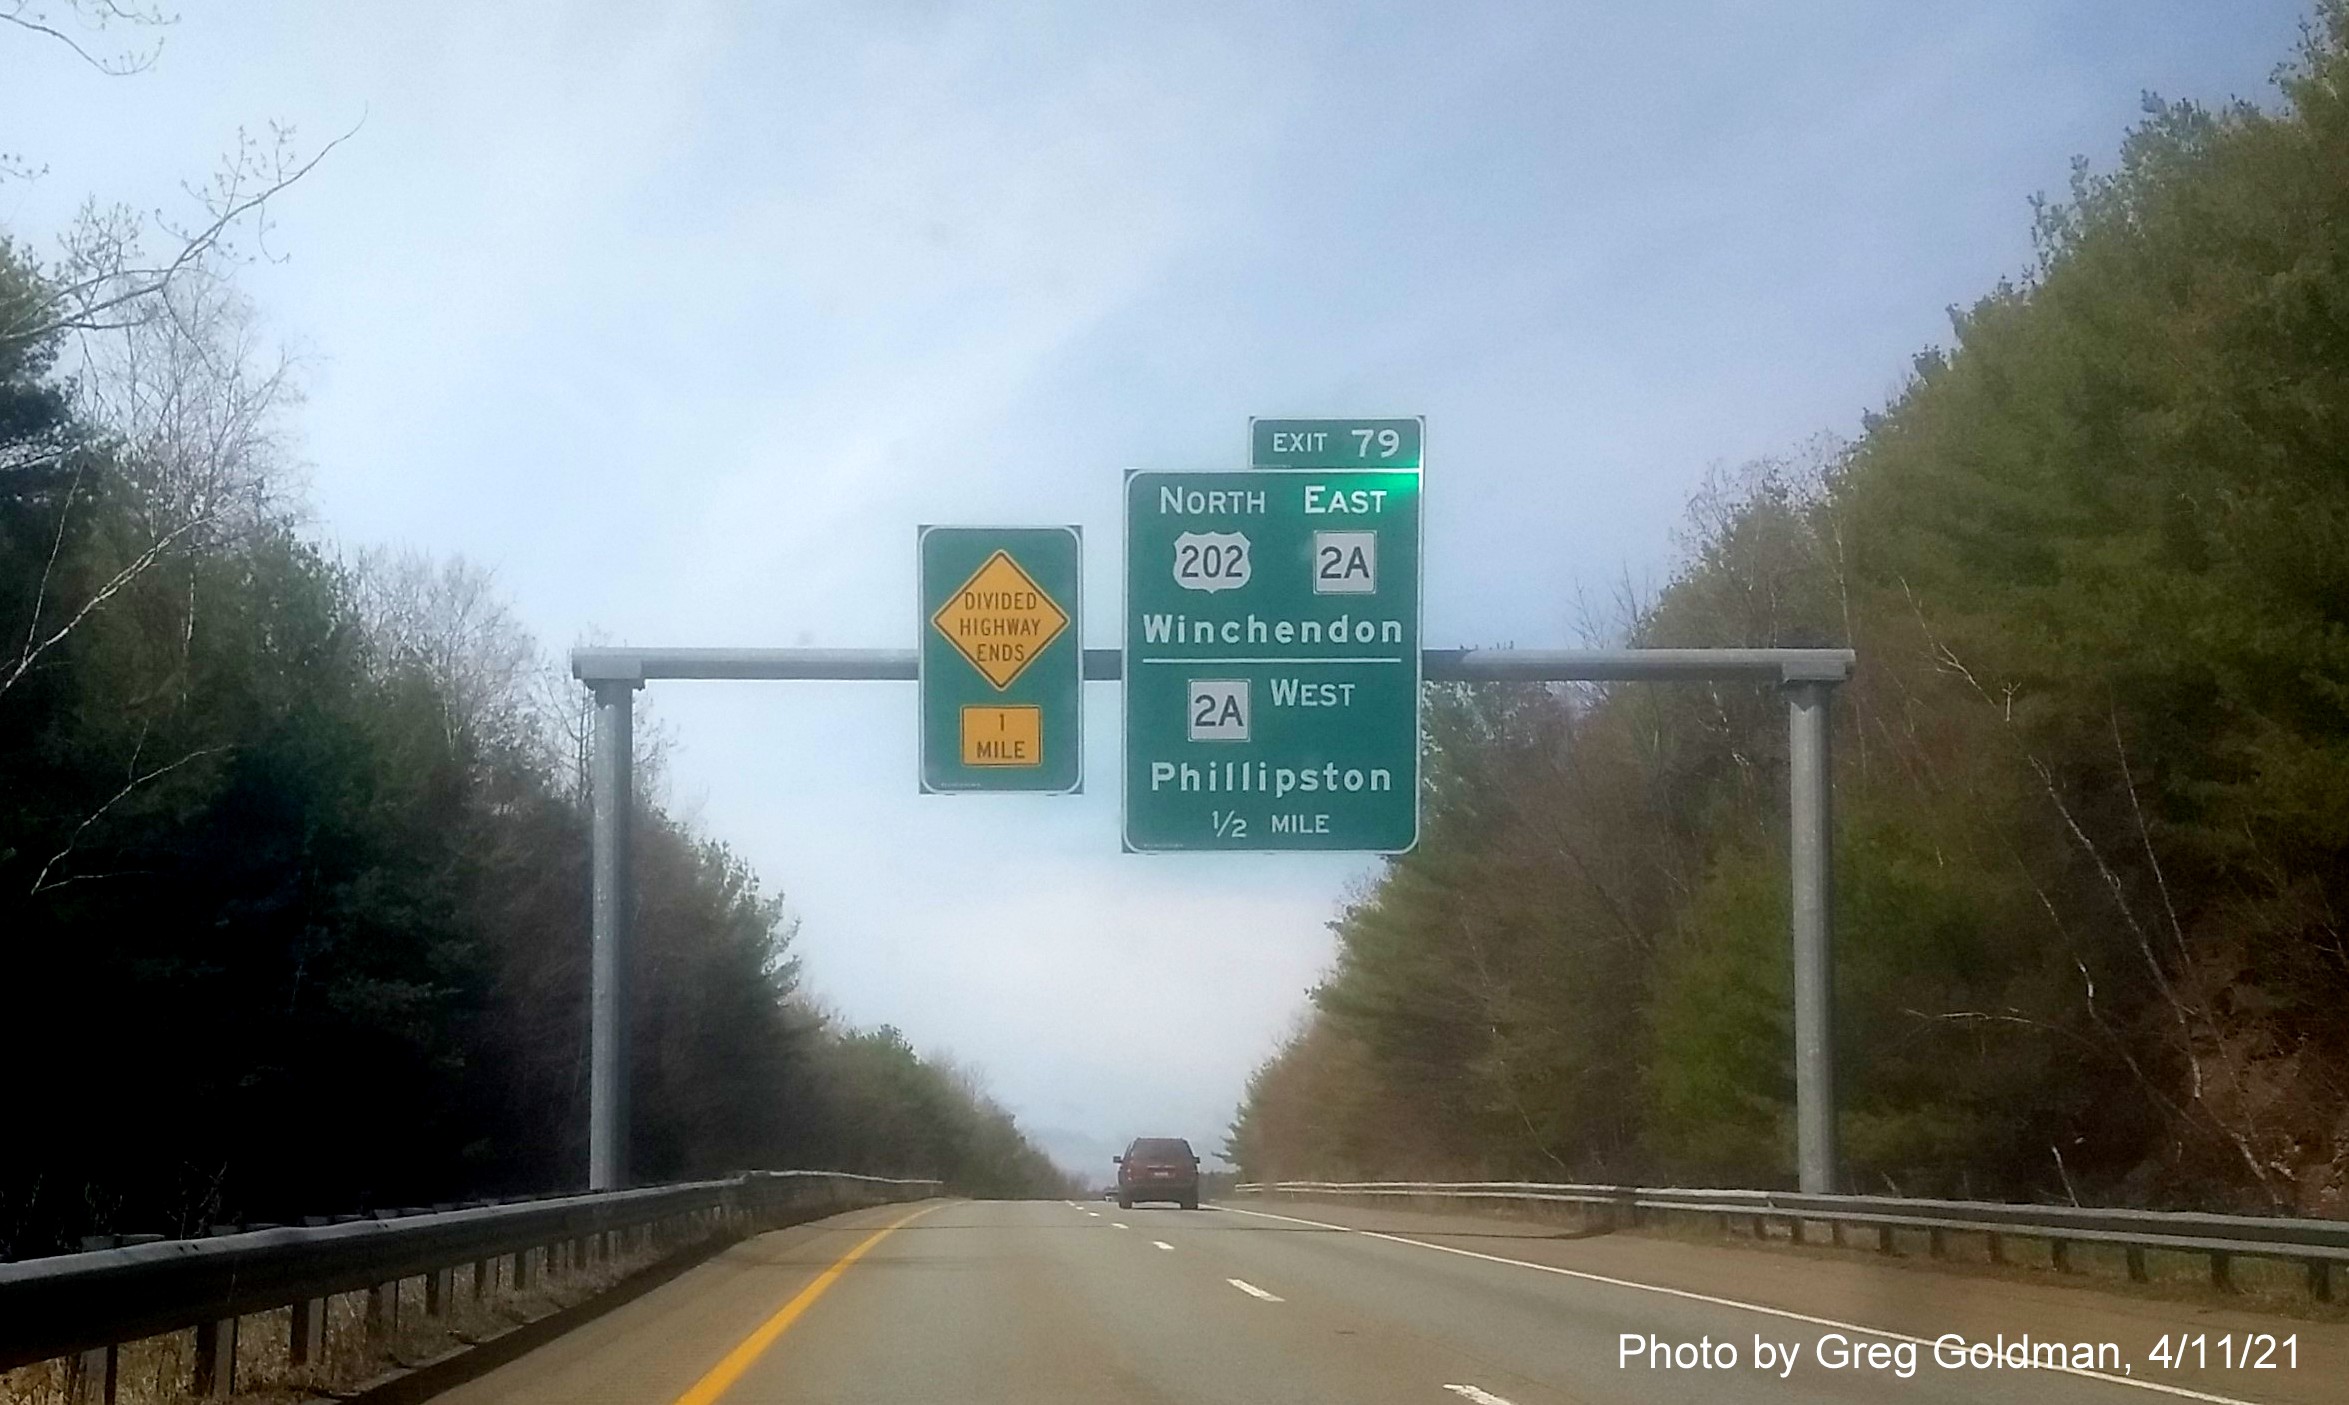 Image of 1/2 Mile advance overhead sign for US 202 North/MA 2A exit with new milepost based exit number on MA 2 West in Winchendon, by Greg Goldman, April 2021